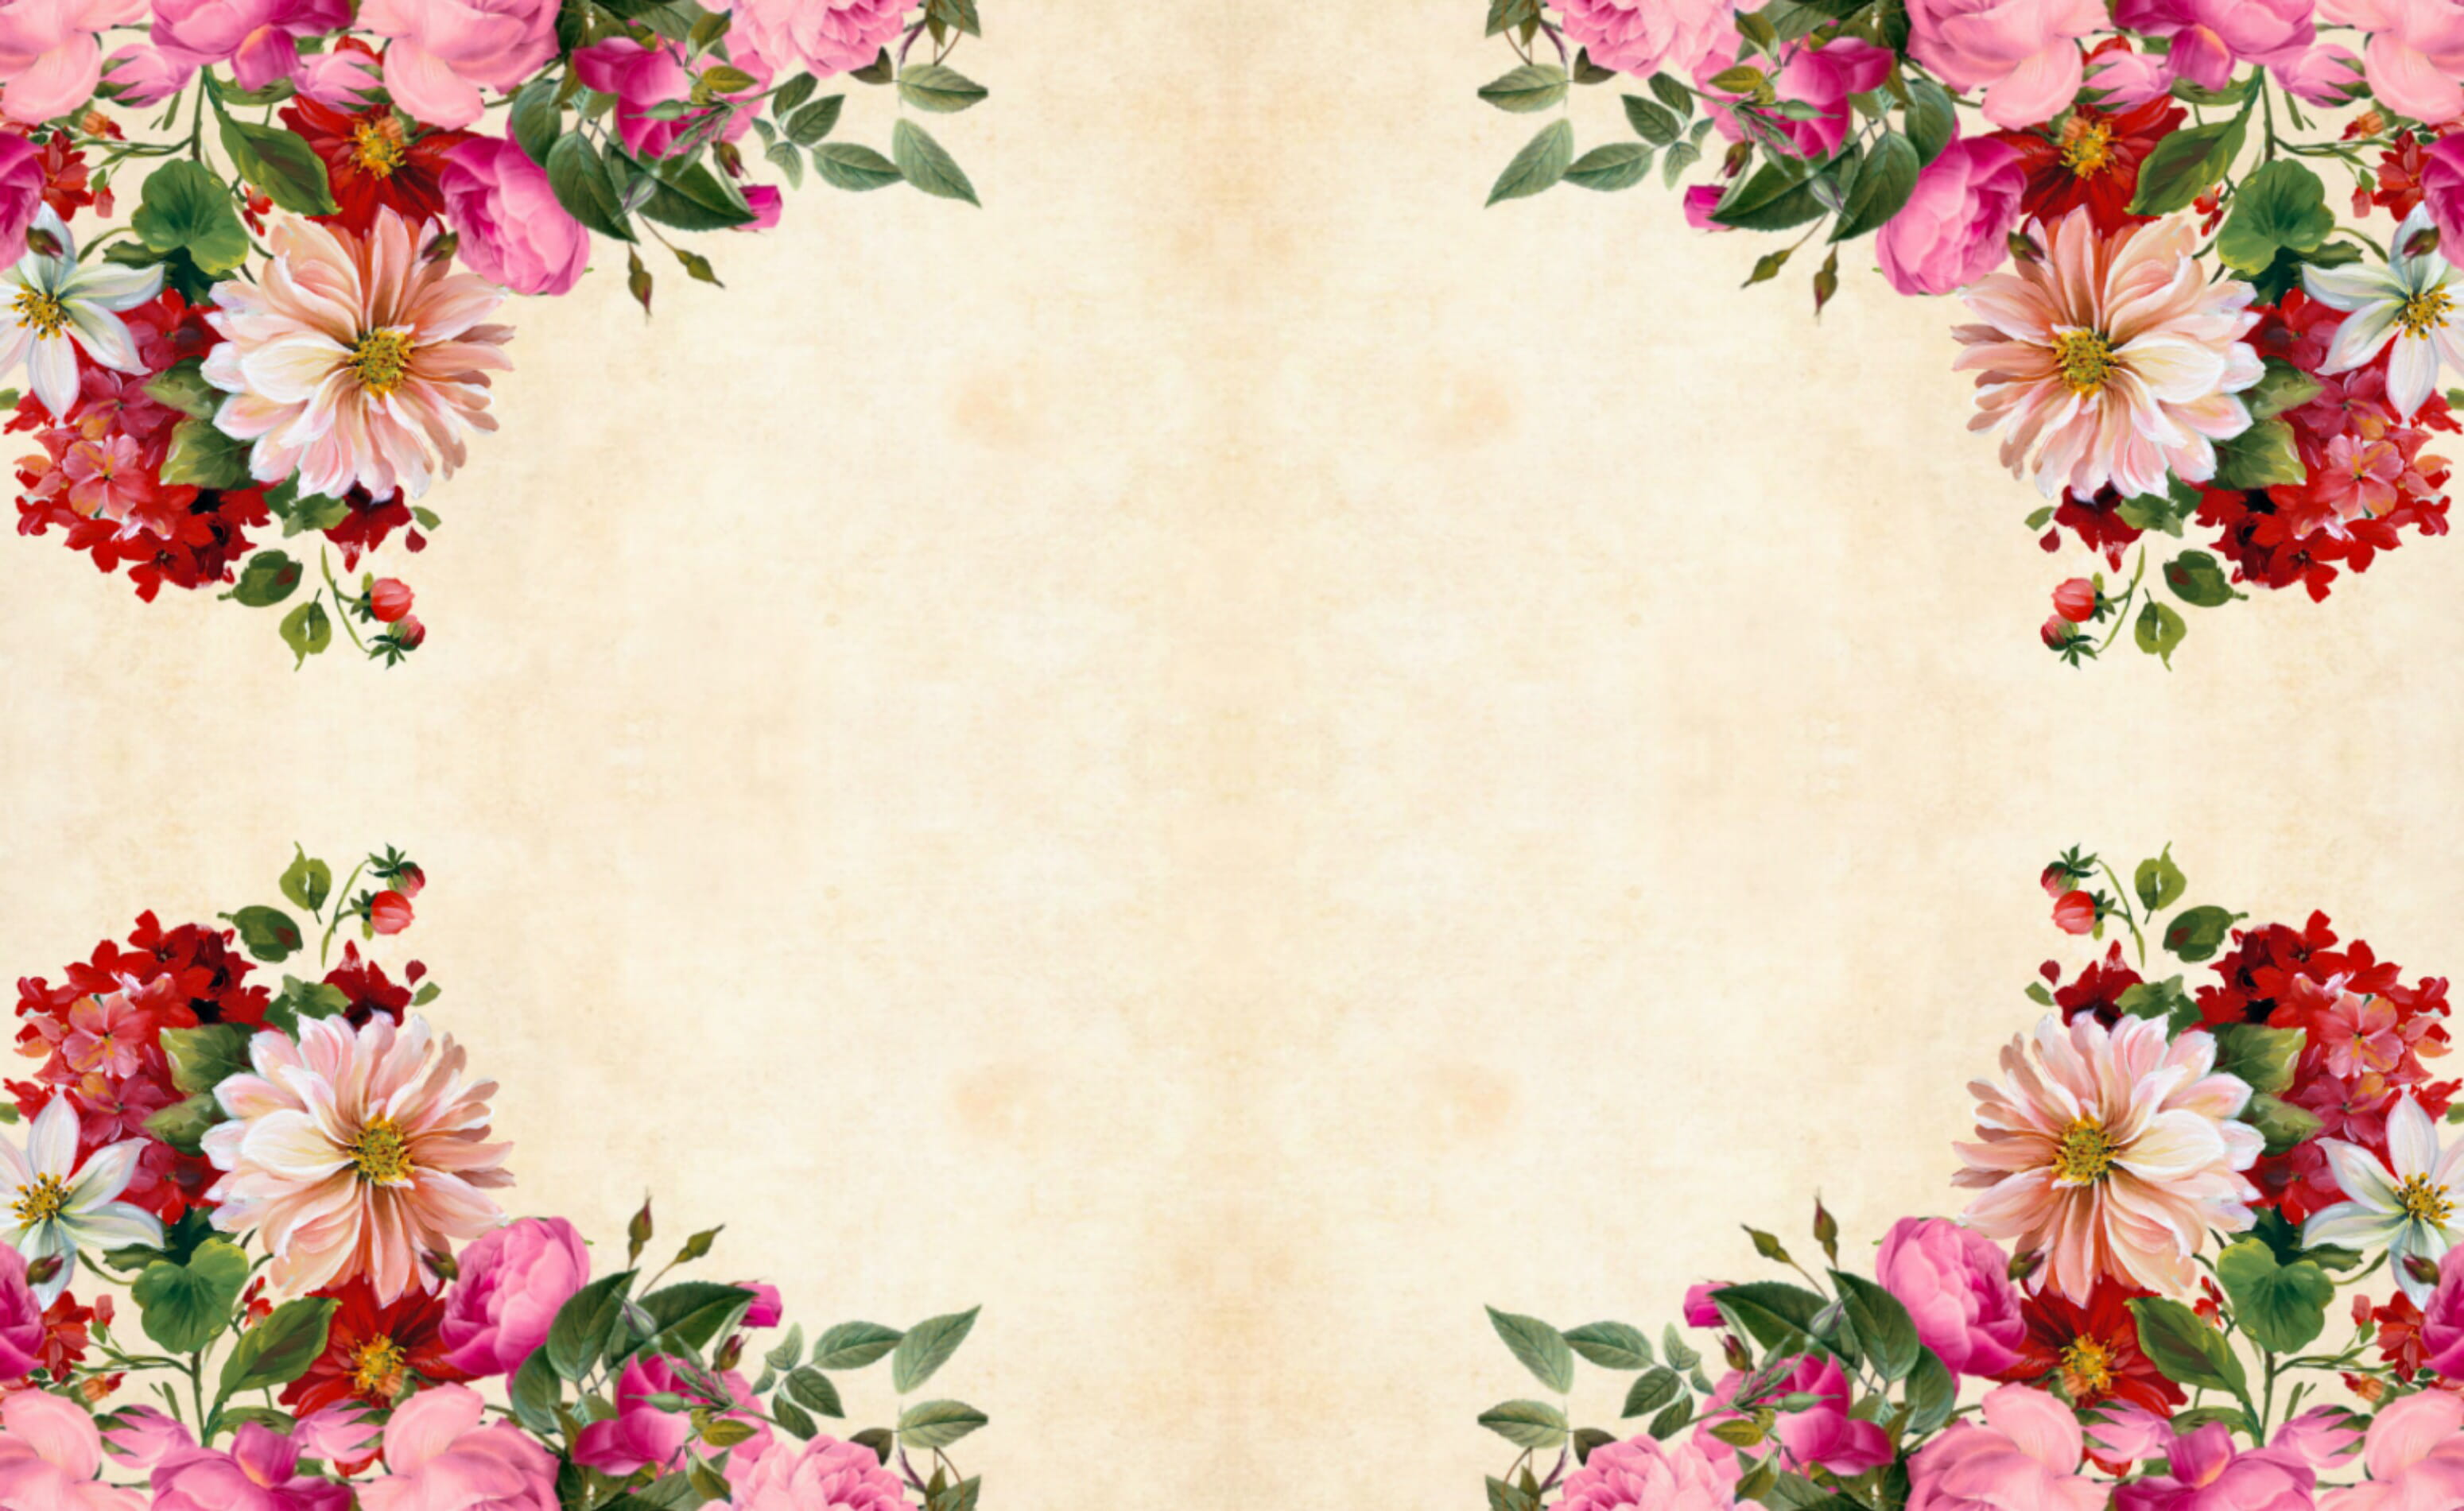 Four quadrants of flower clusters forming floral background.